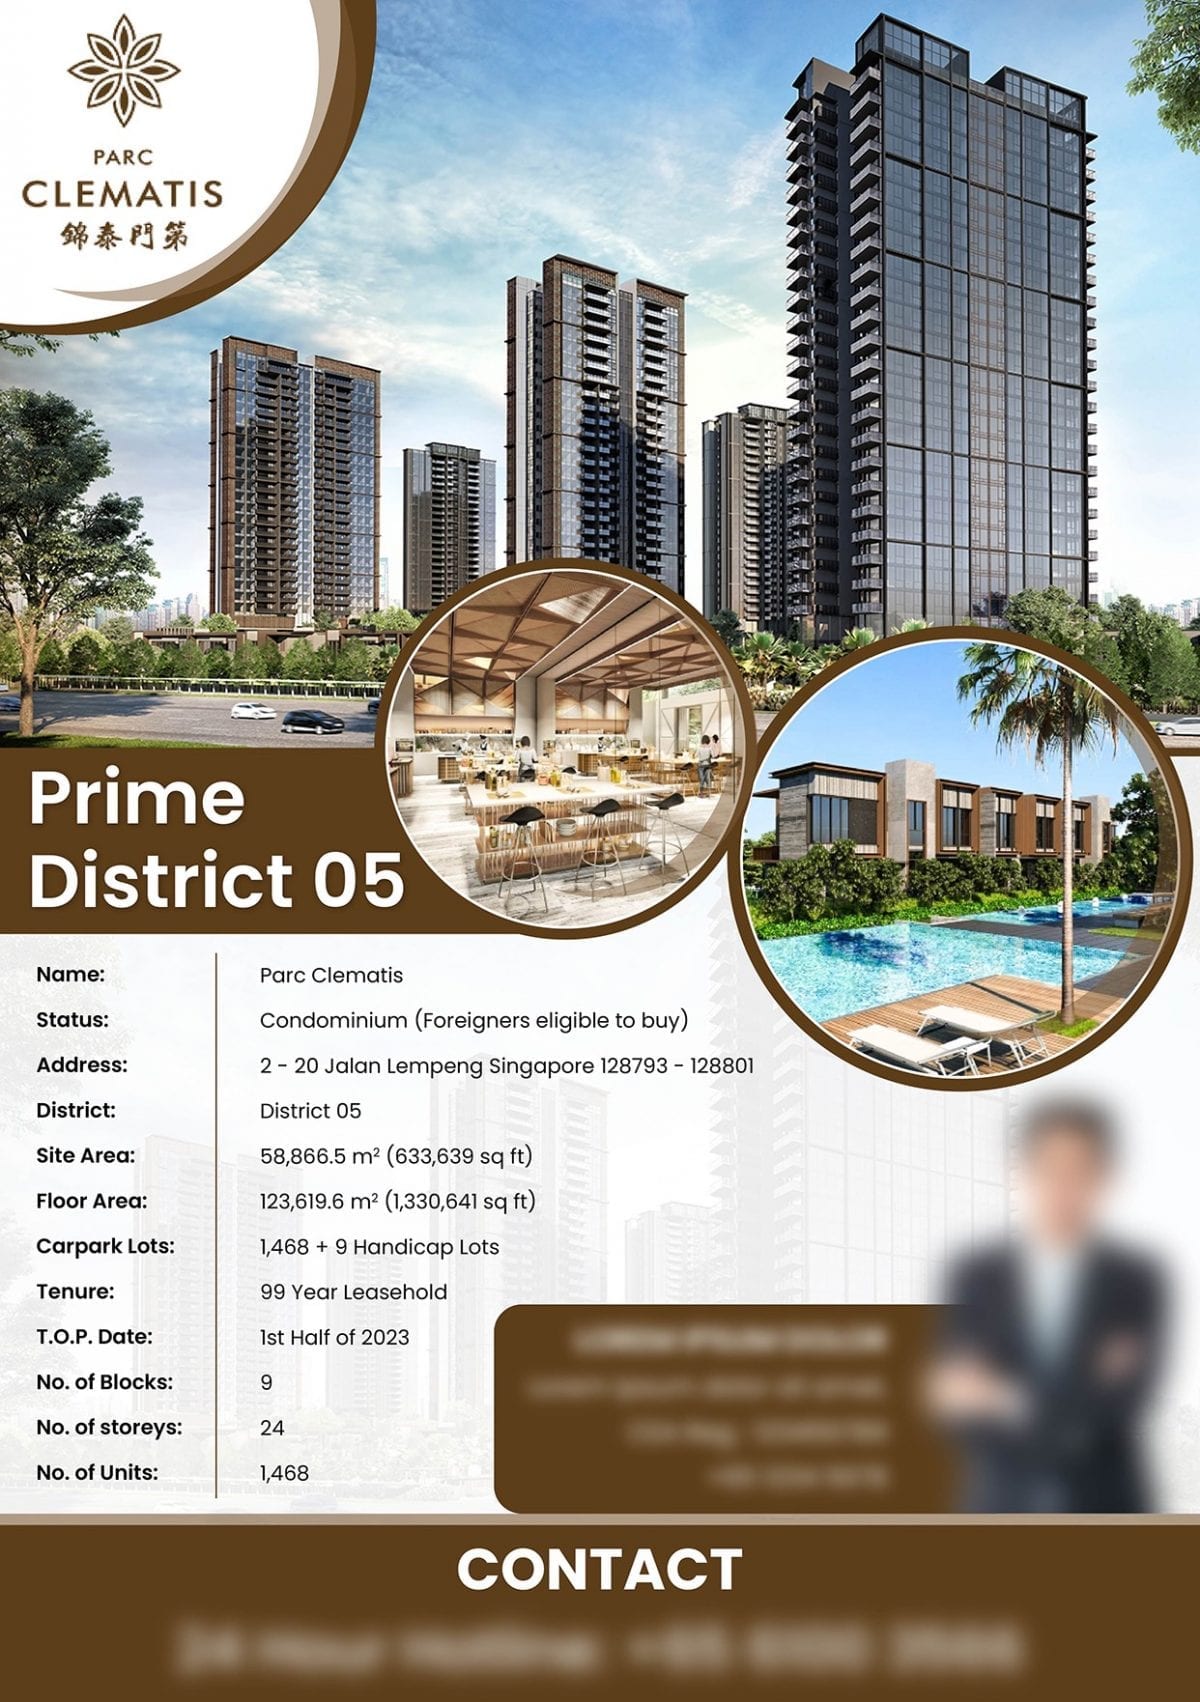 Property-Flyer-Design-Services-in-Singapore-for-Real-Estate-Agent--1200x1702.jpg